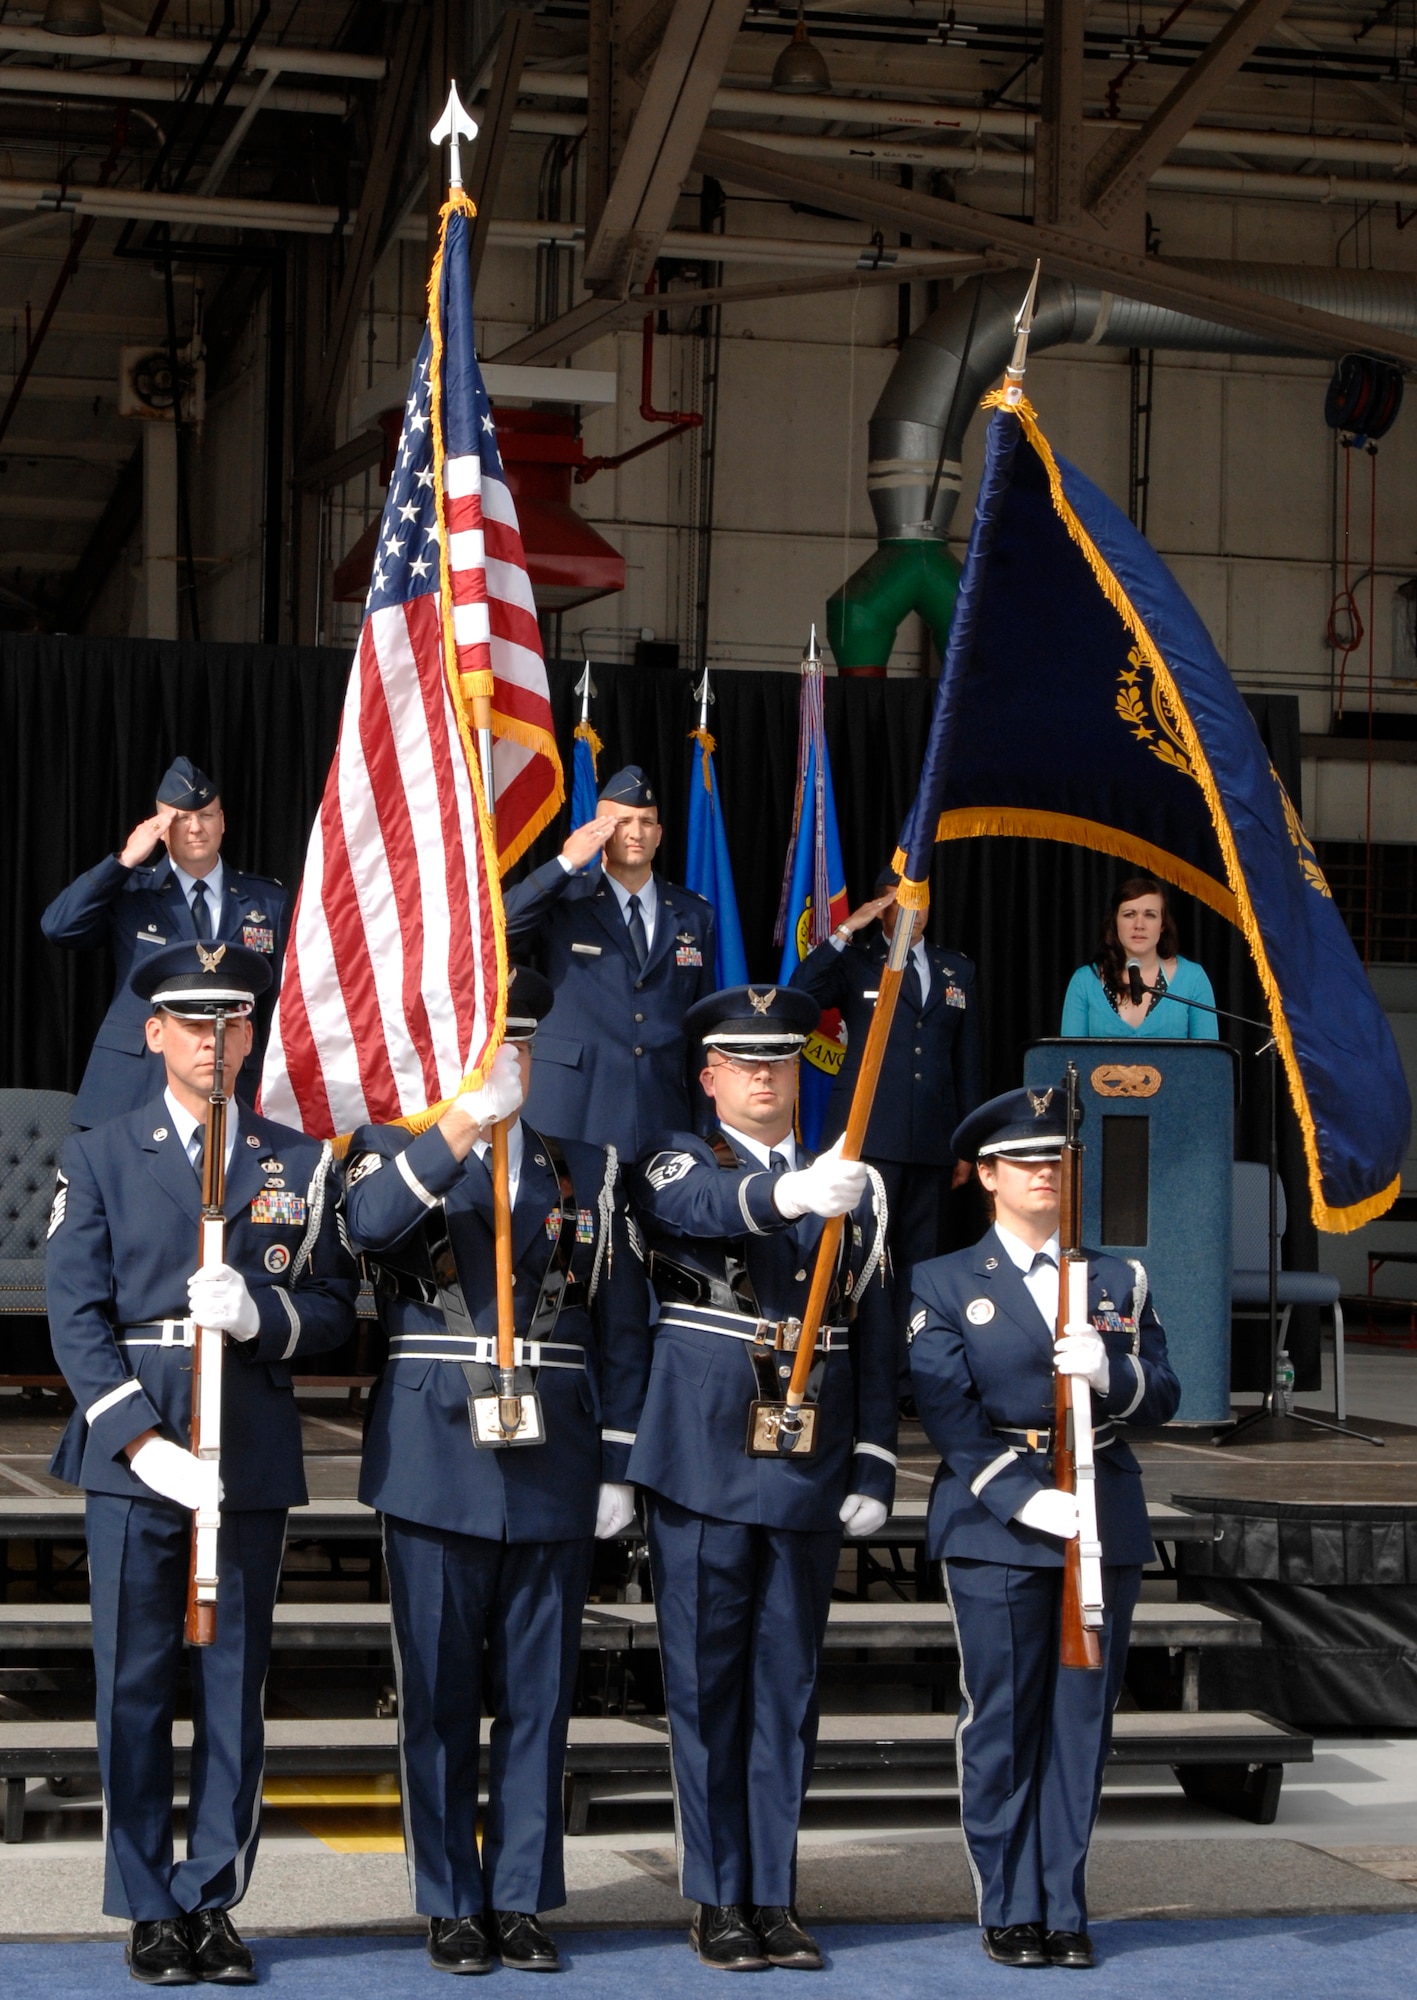 Pease Air National Guard Base, N.H., Honor Guard members begin the 64th Air Refueling Squadron activation and assumption of command ceremony, Oct. 2, 2009, with a salute during the singing of the national anthem.  (U.S. Air Force photo/Senior Airman Laura Suttles)